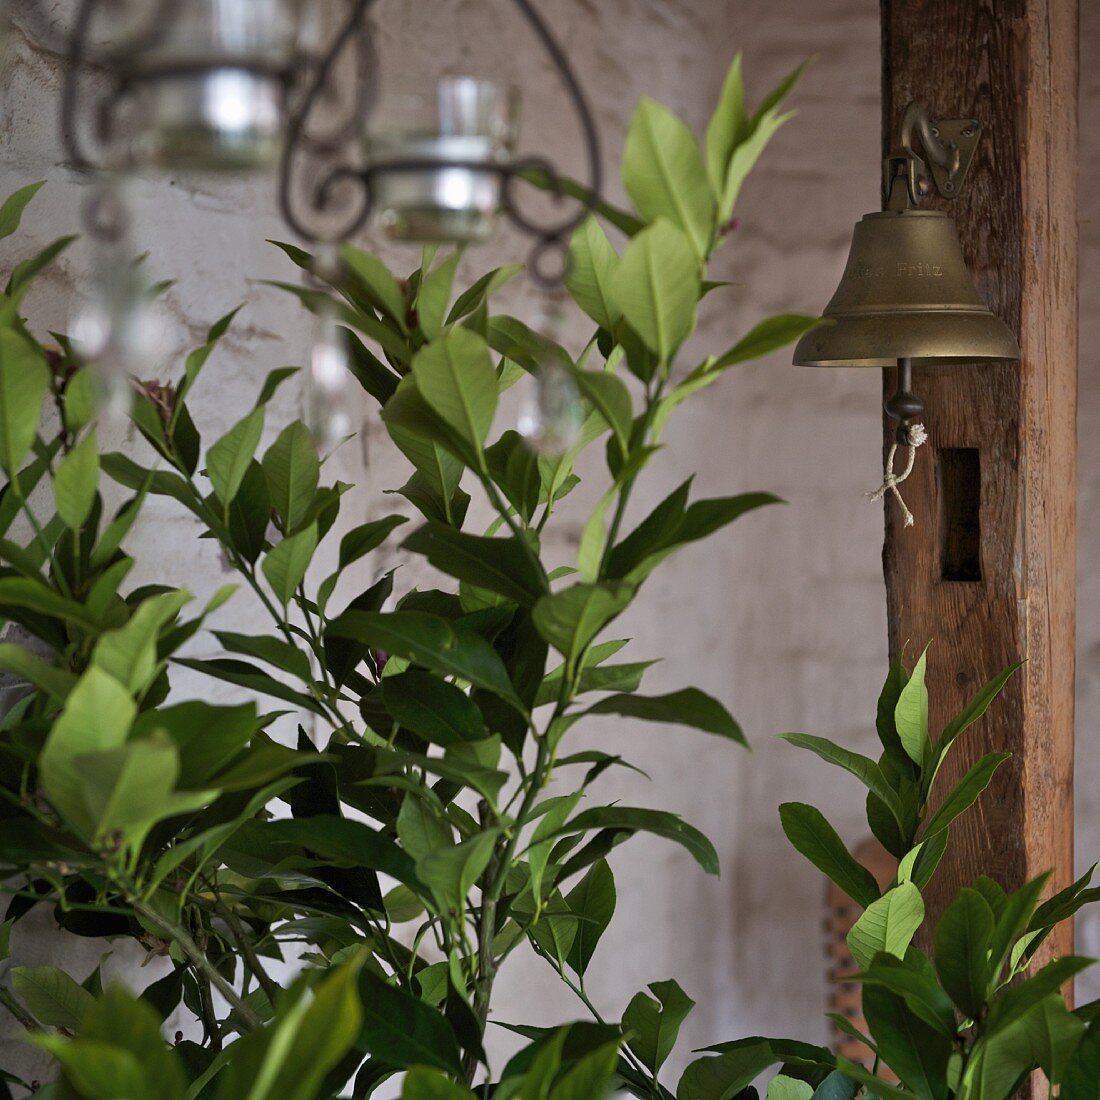 Green plants next to brass bell hanging on wooden post